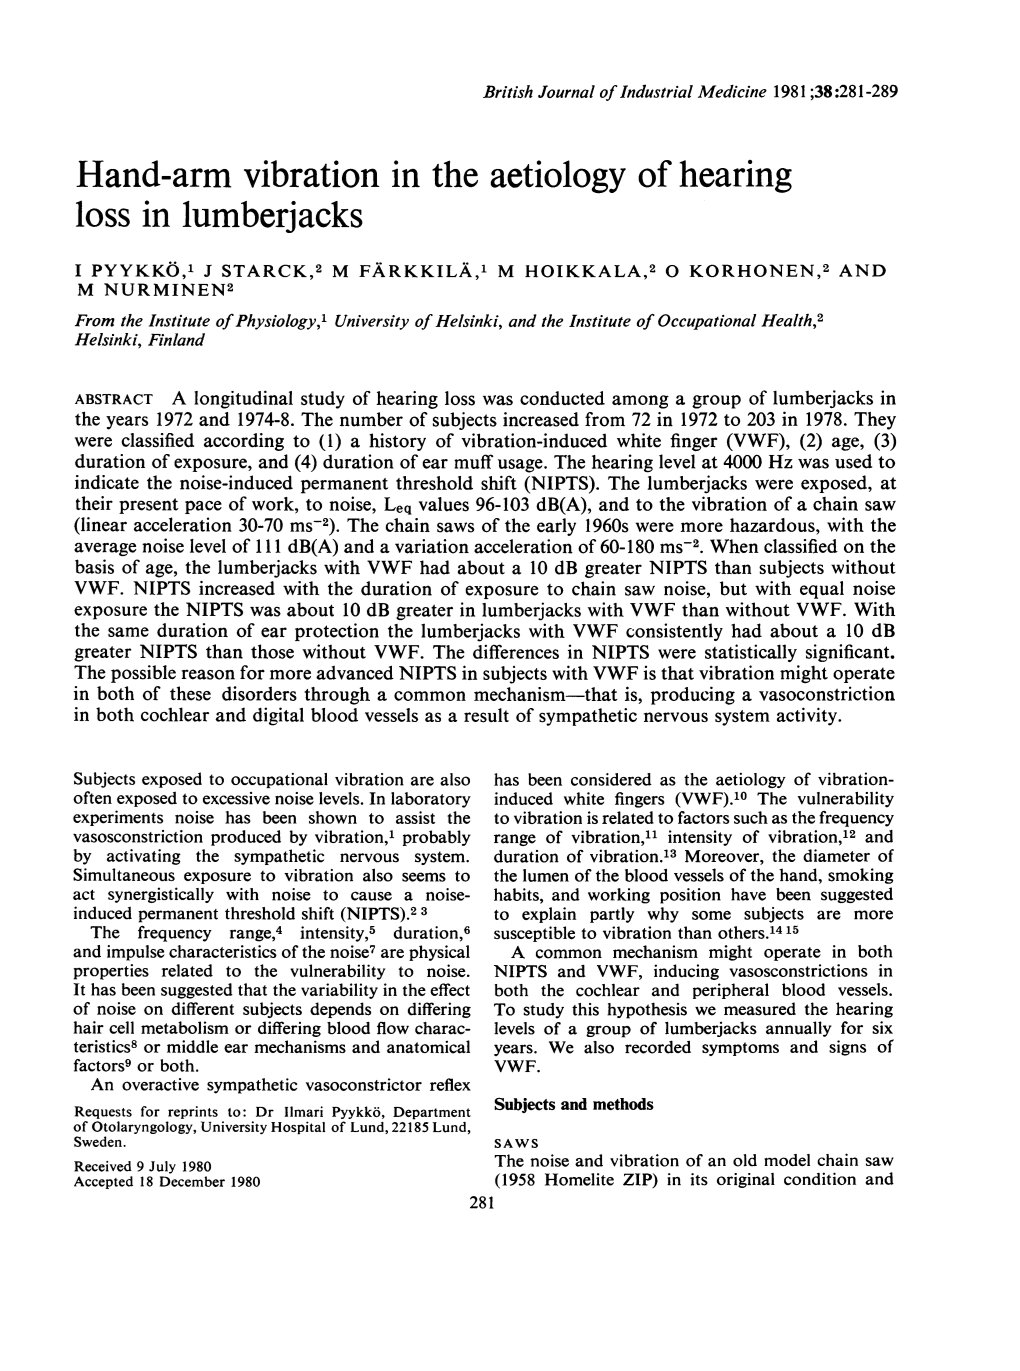 Hand-Arm Vibration in the Aetiology of Hearing Loss in Lumberjacks